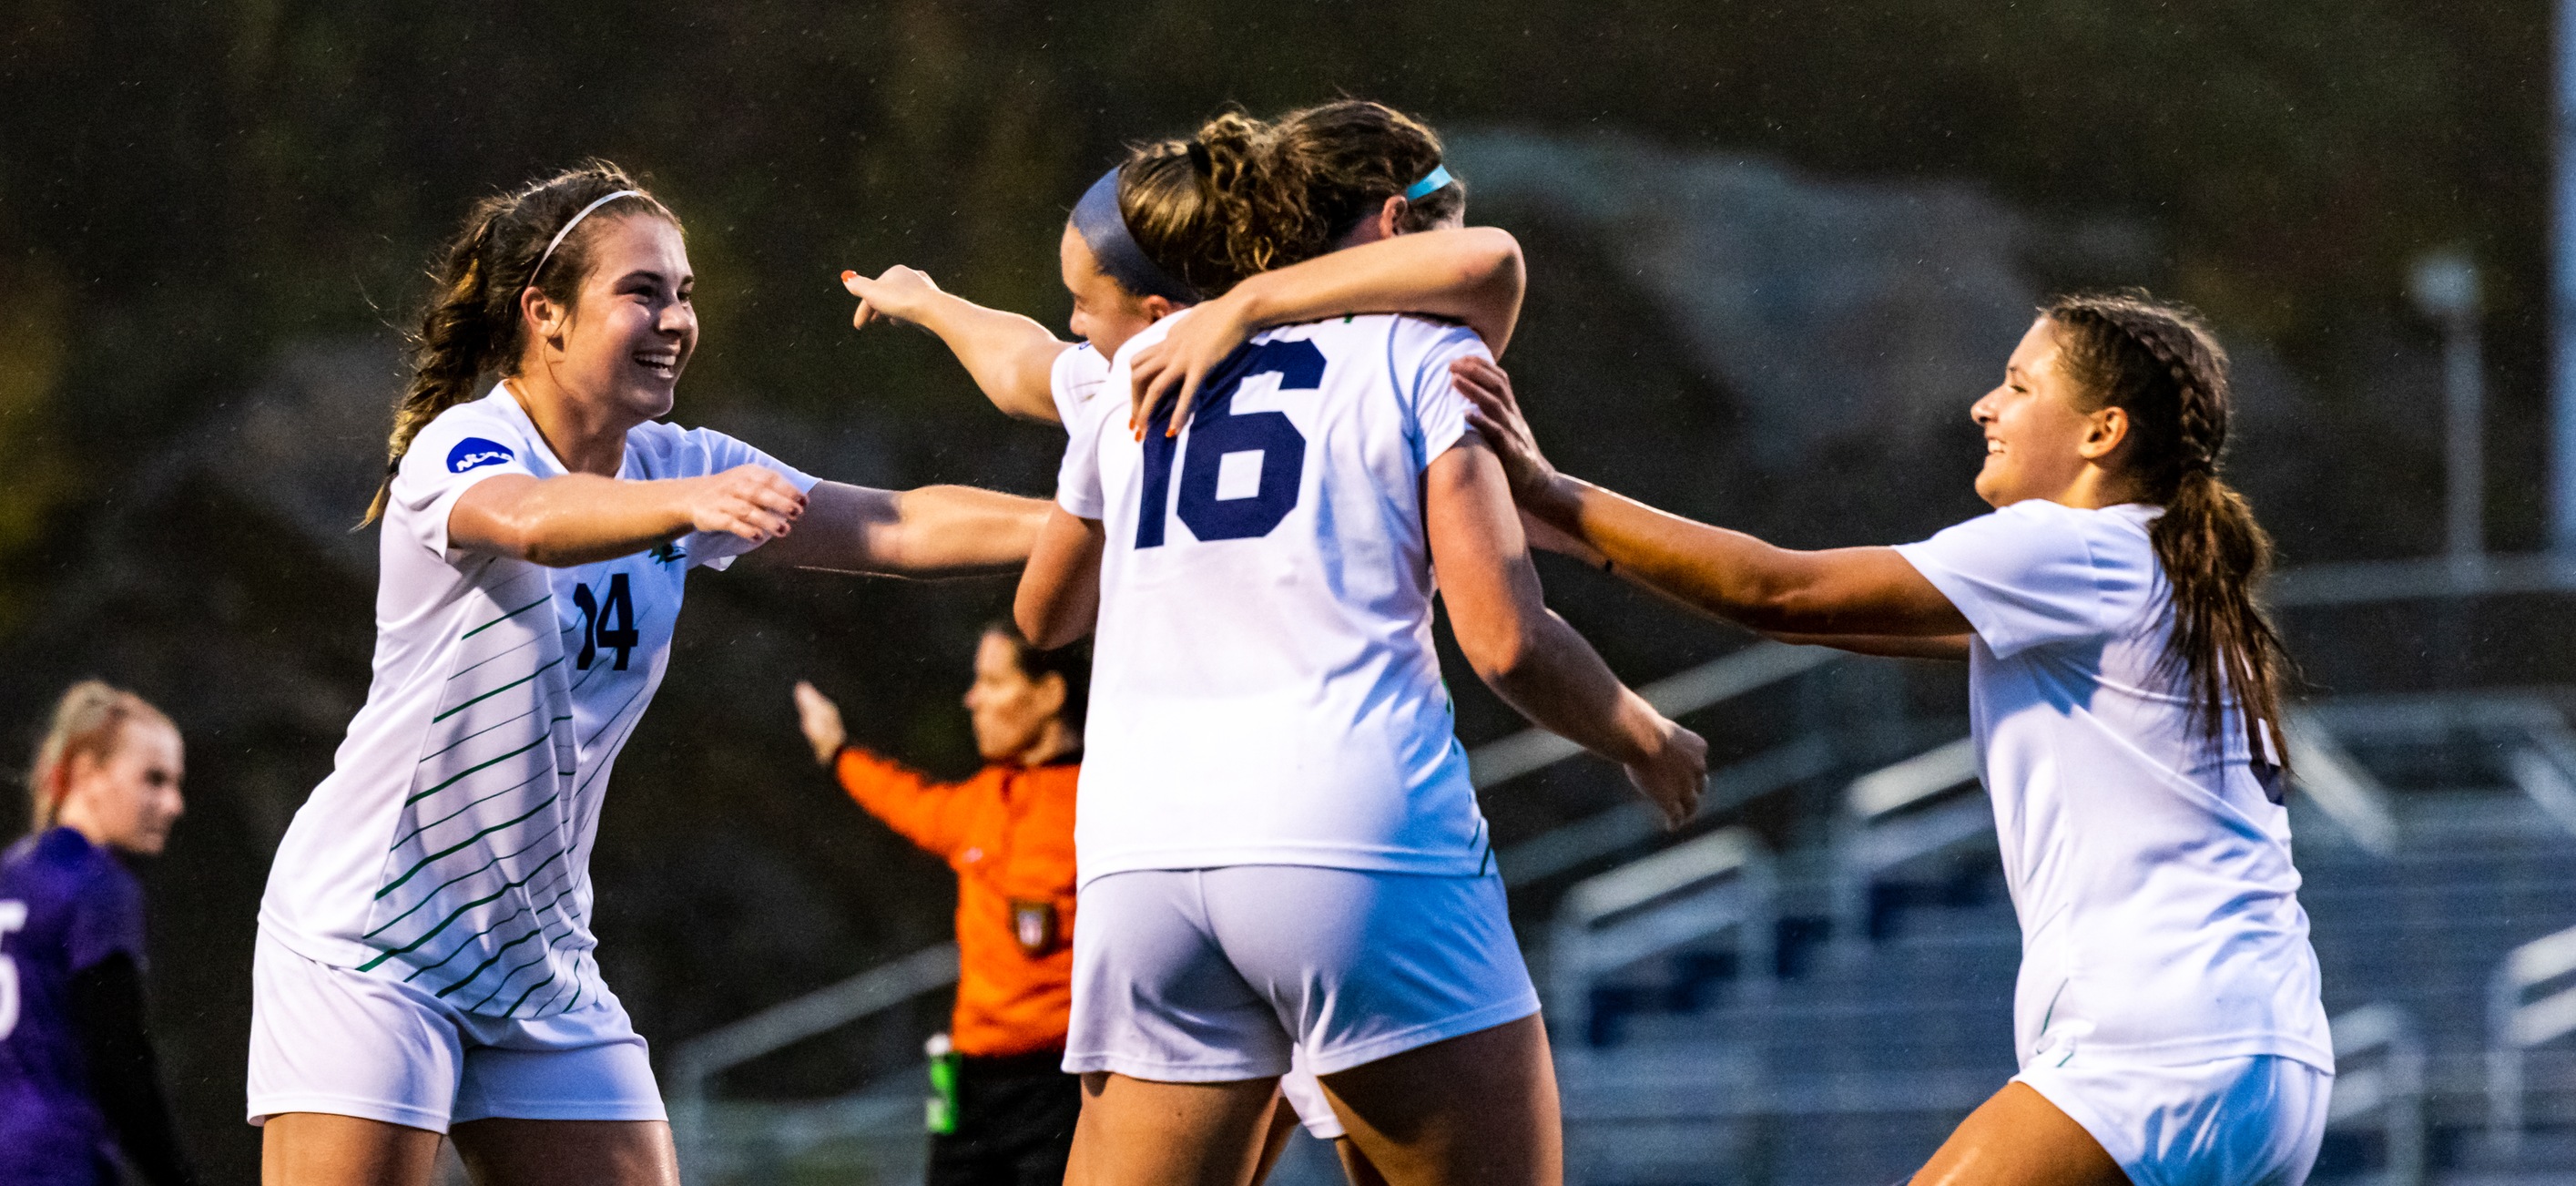 Members of the women's soccer team celebrate a goal by Madeline Mucher.